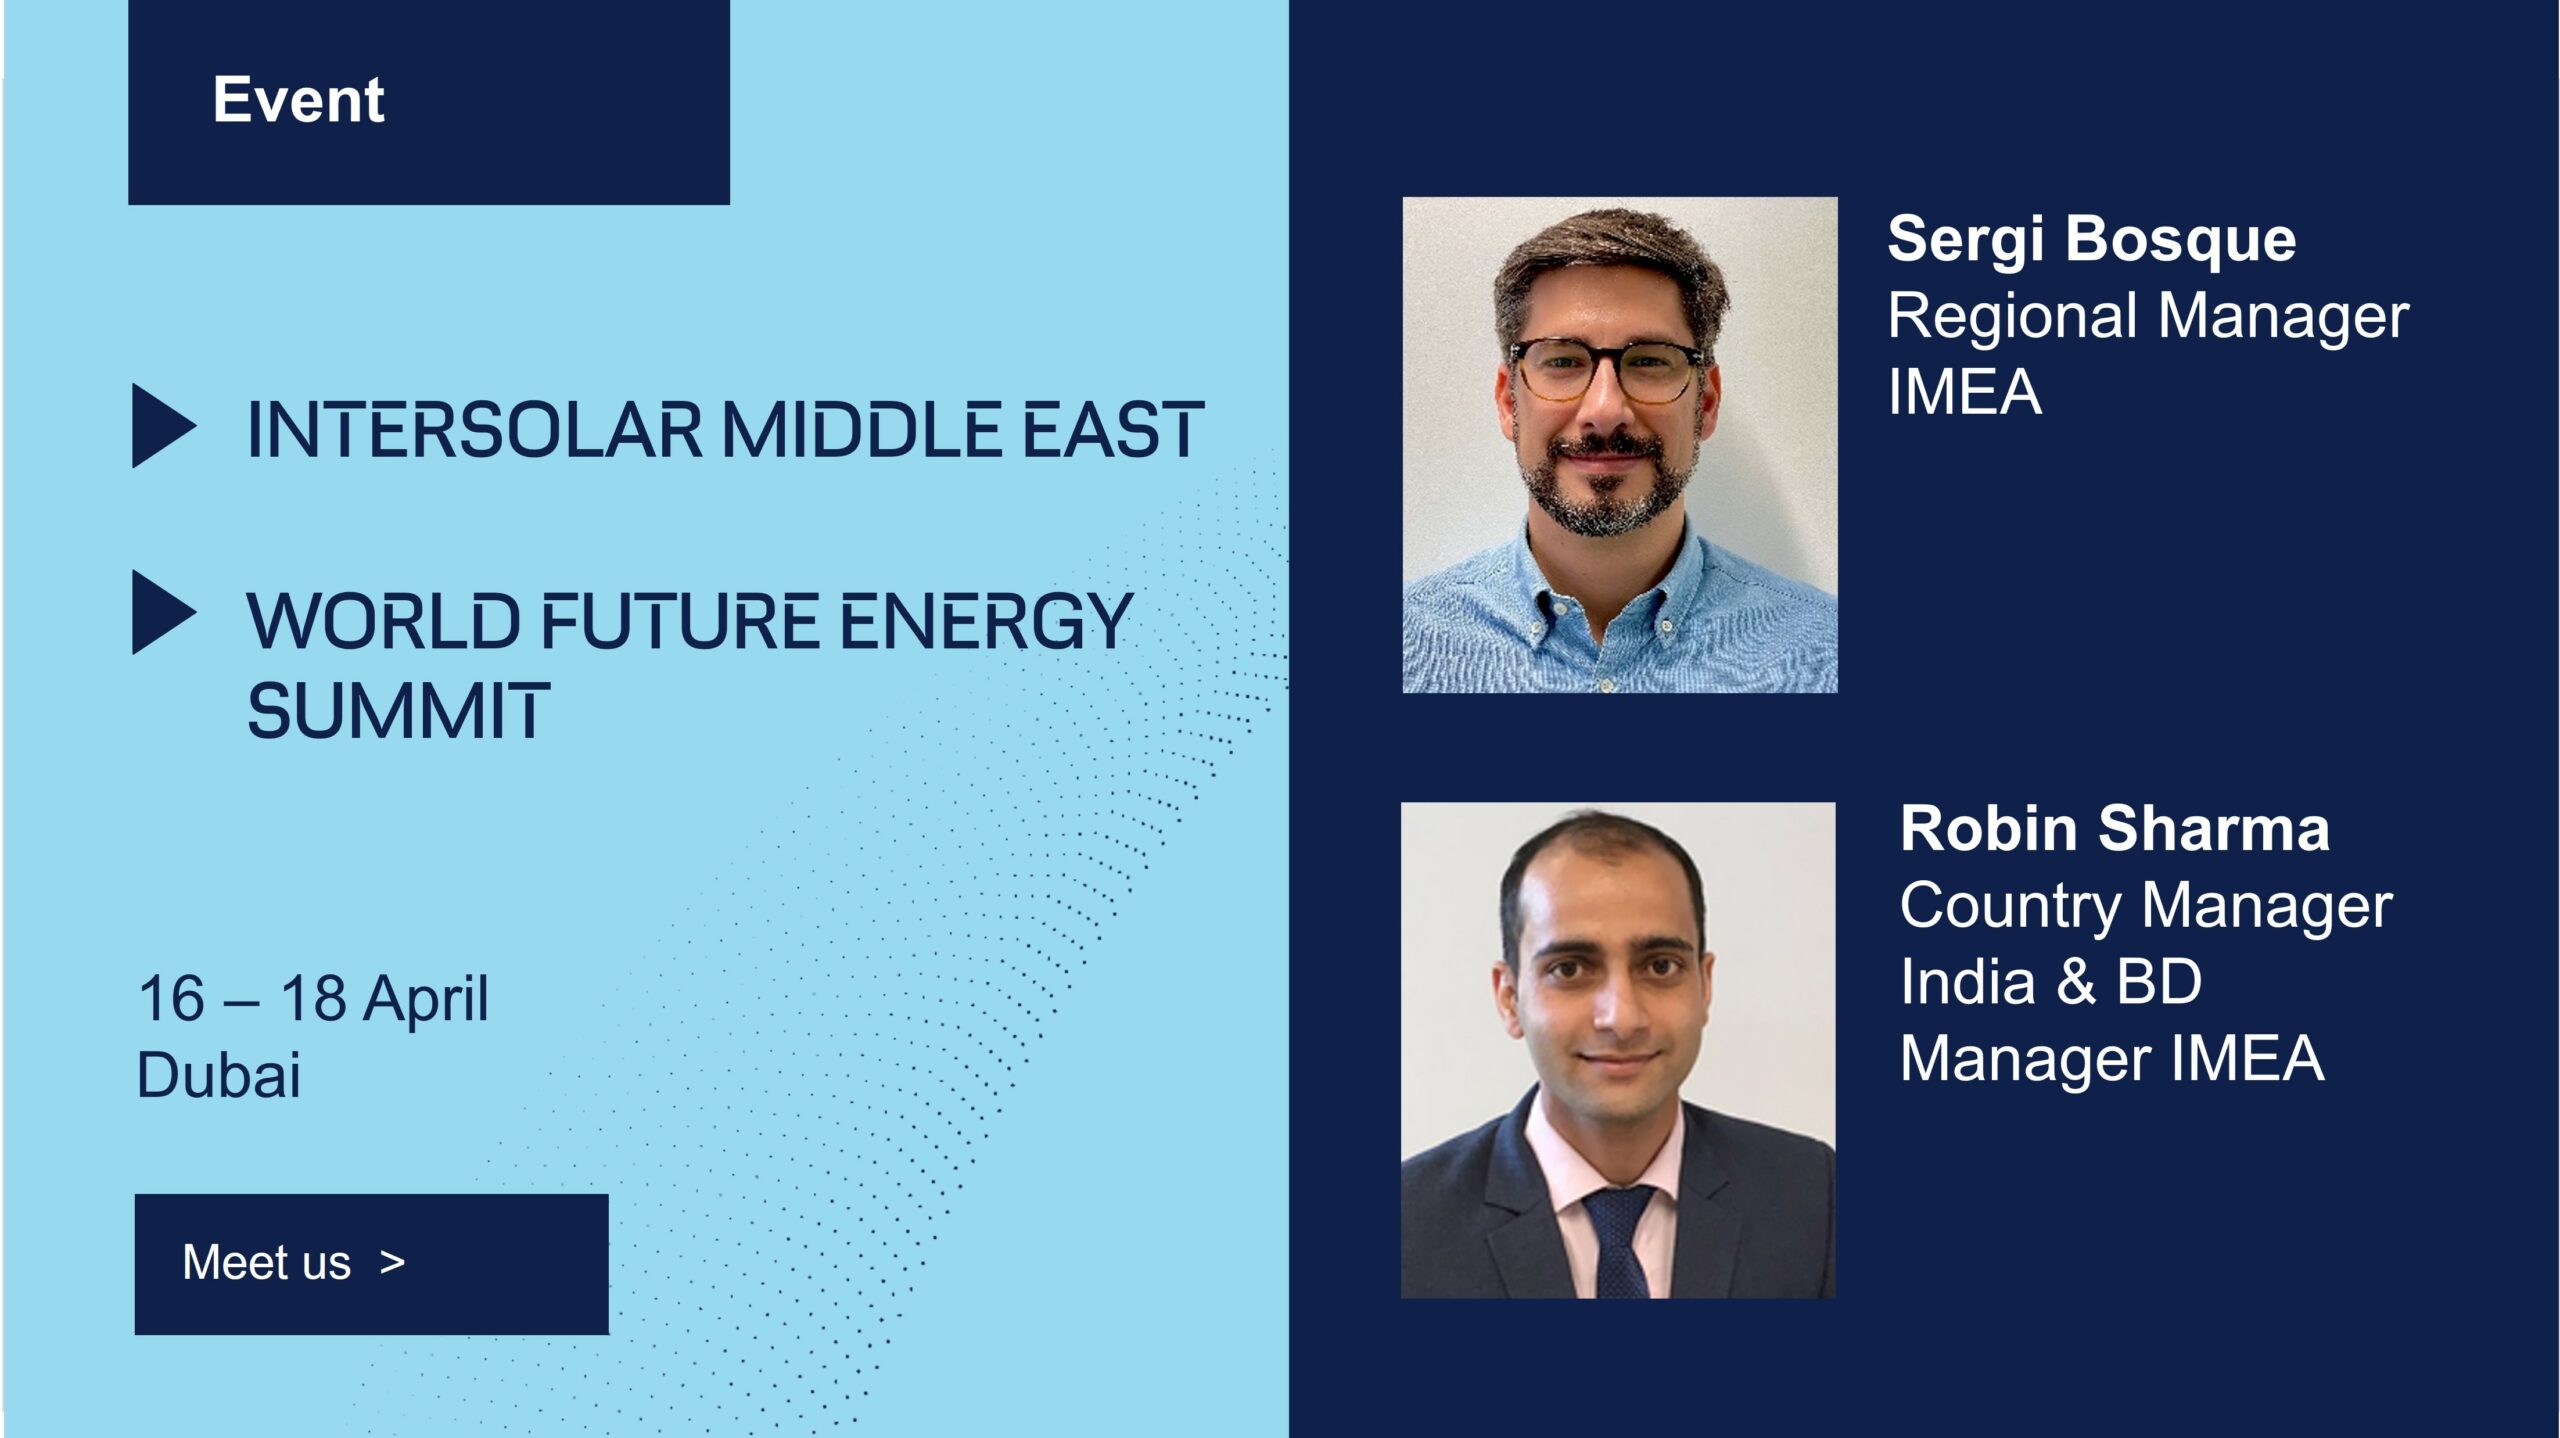 GreenPowerMonitor will attend Intersolar Middle East and World Future Energy Summit, both will be held from April 16 to 18 in Dubai.